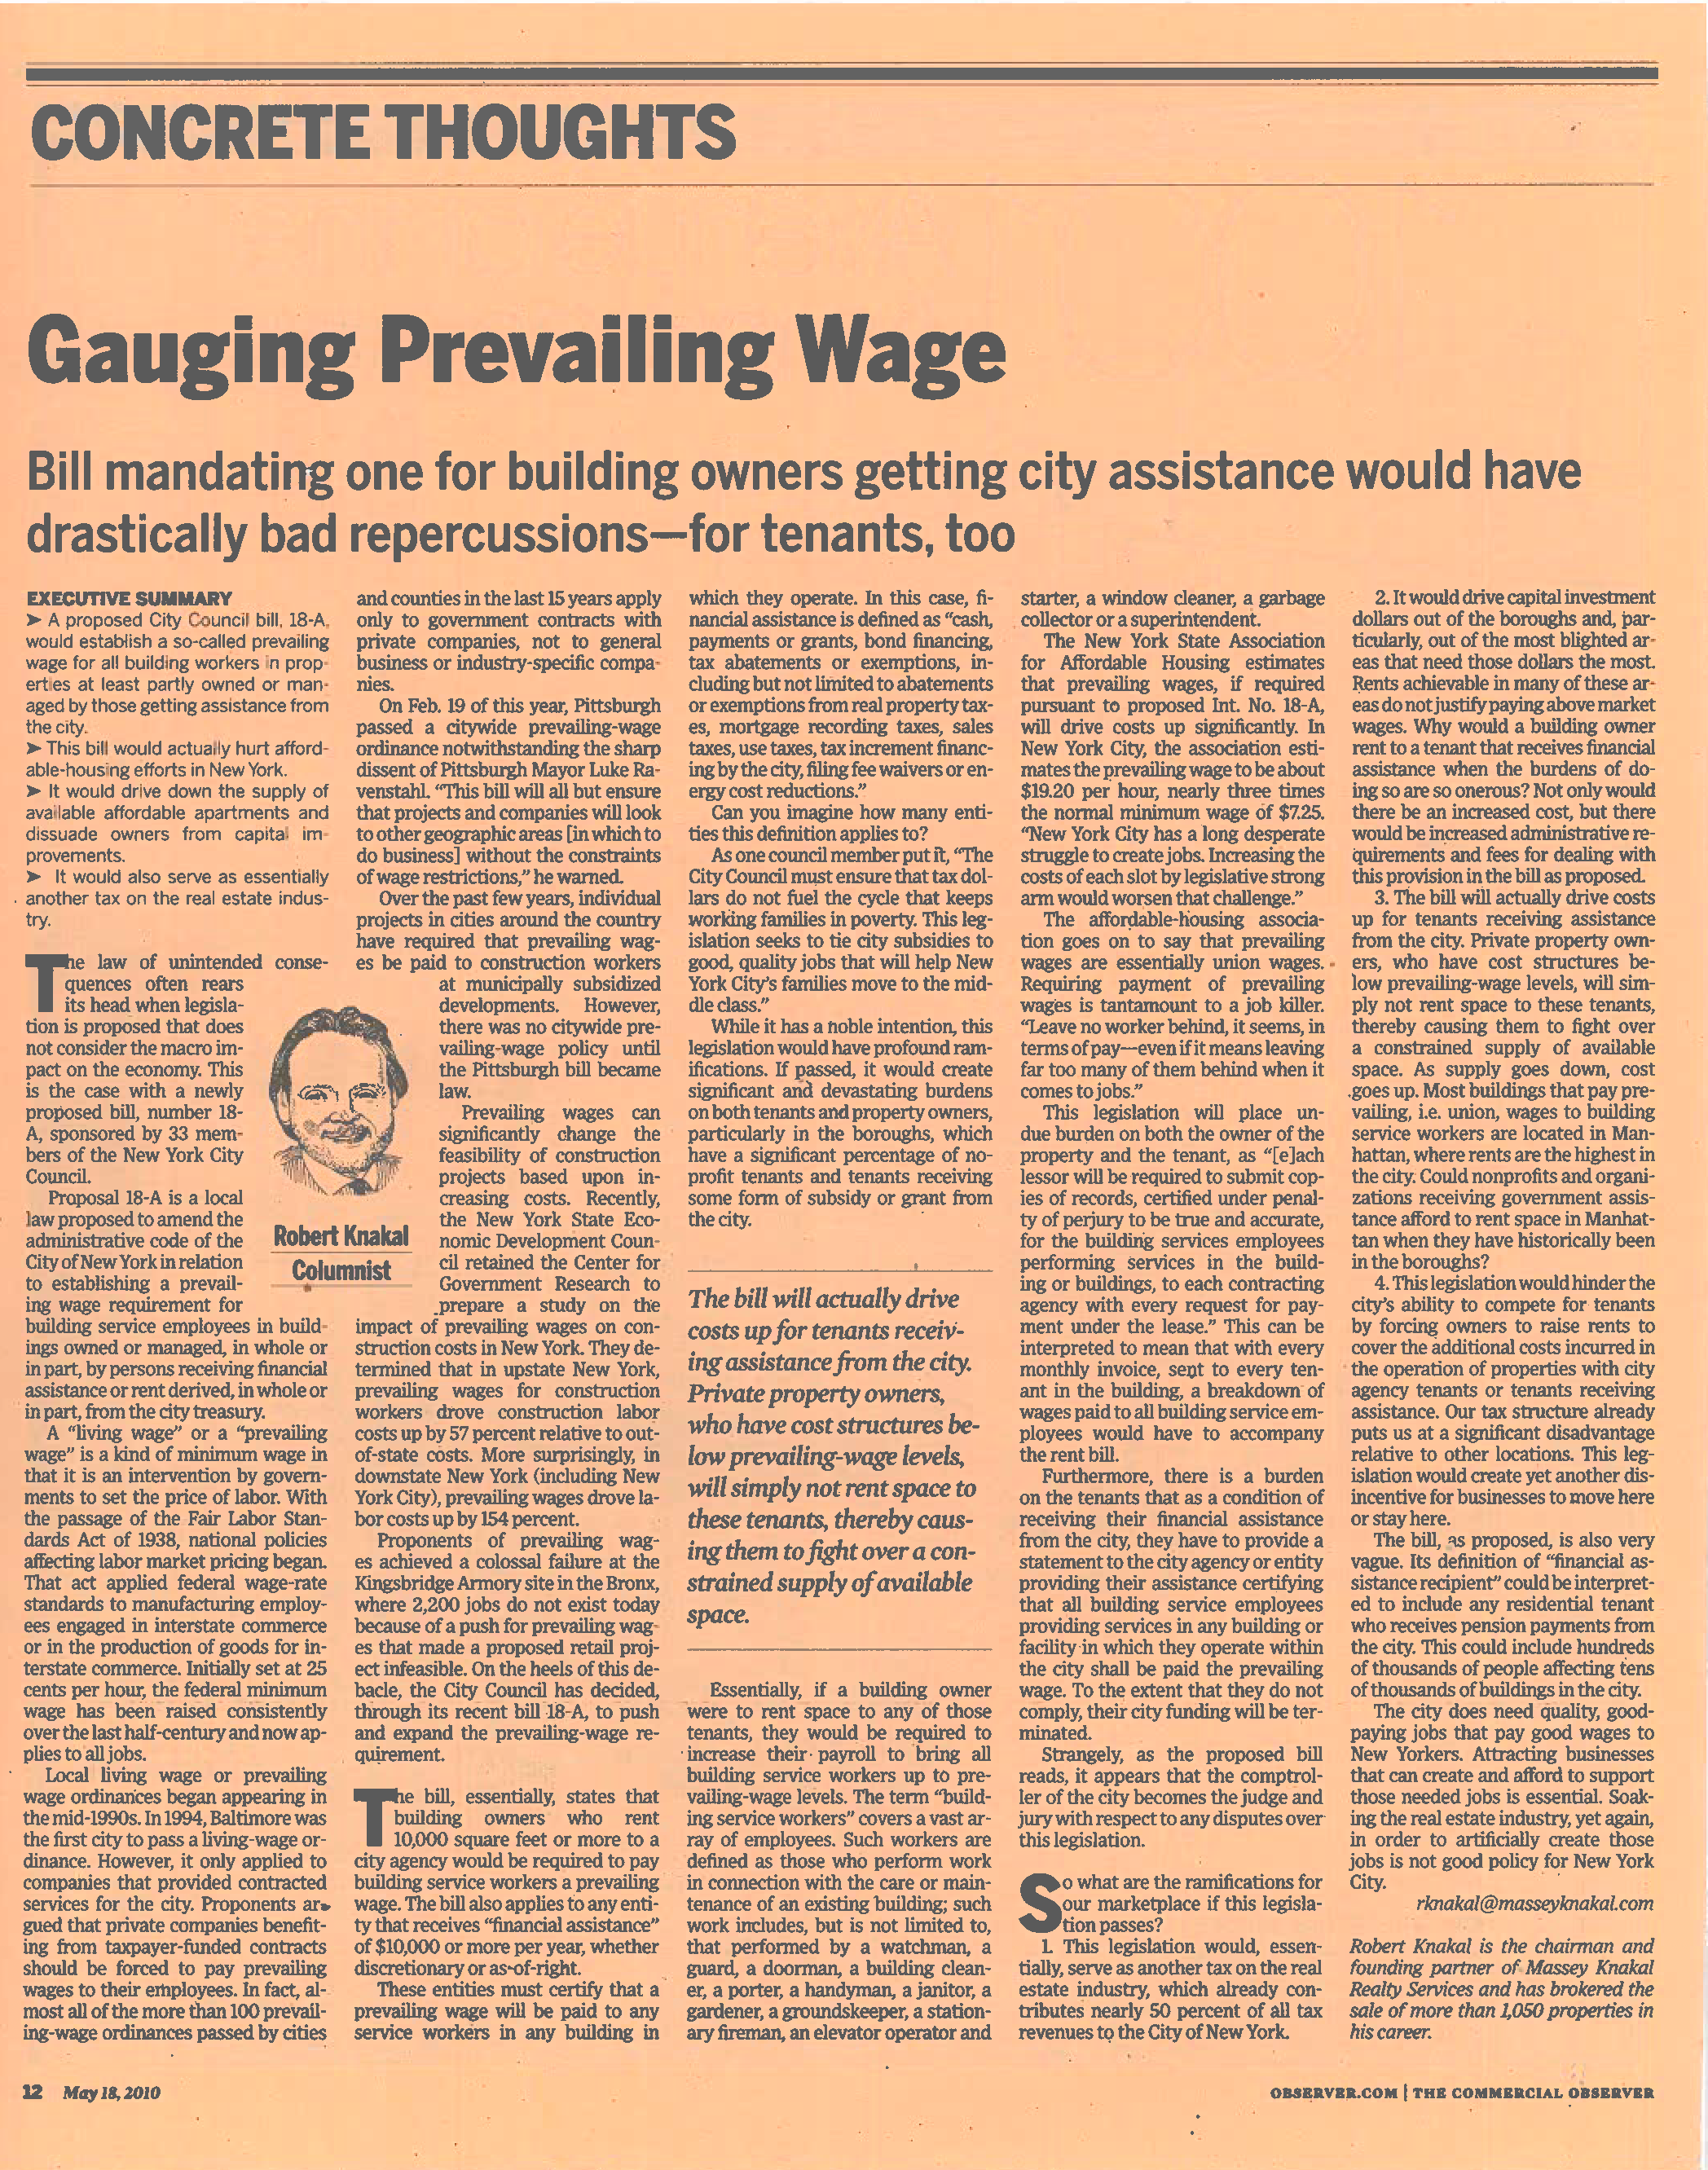 Concrete Thoughts - Gauging Prevailing Wage - May 18 2010